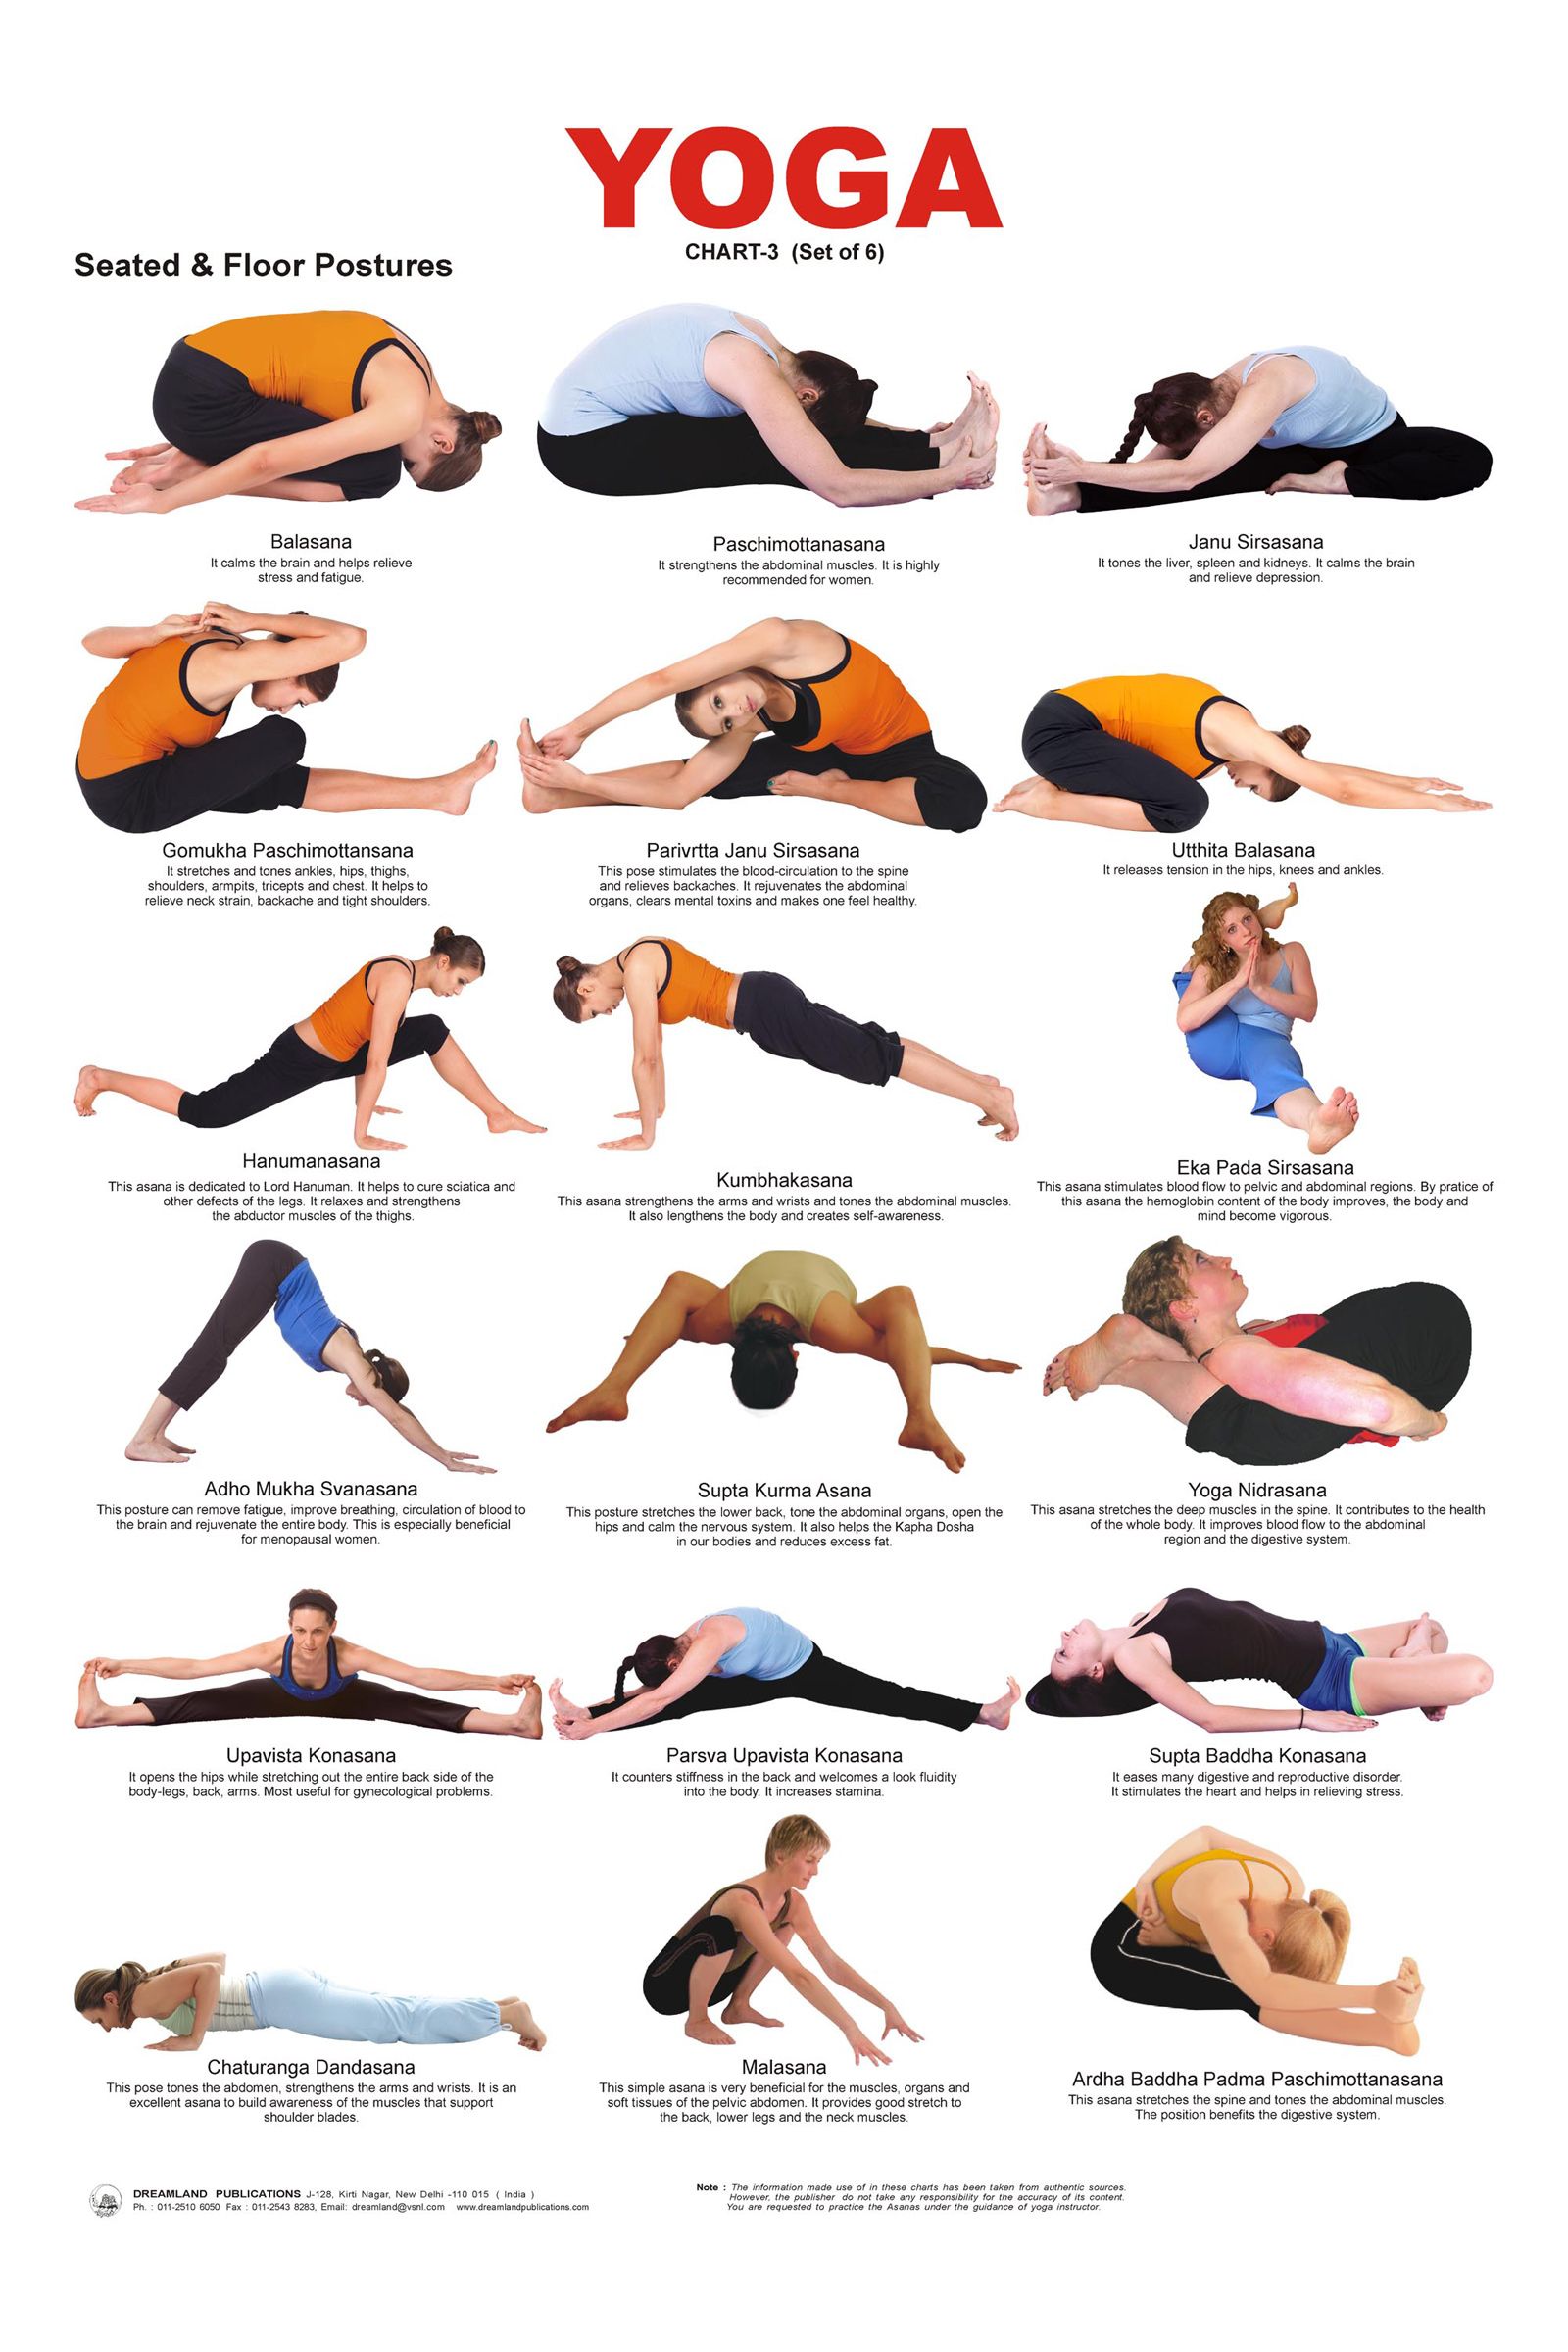 yoga Home Dreamland At on  3  the Poses floor For Yoga poses Chart chart Beginners yoga